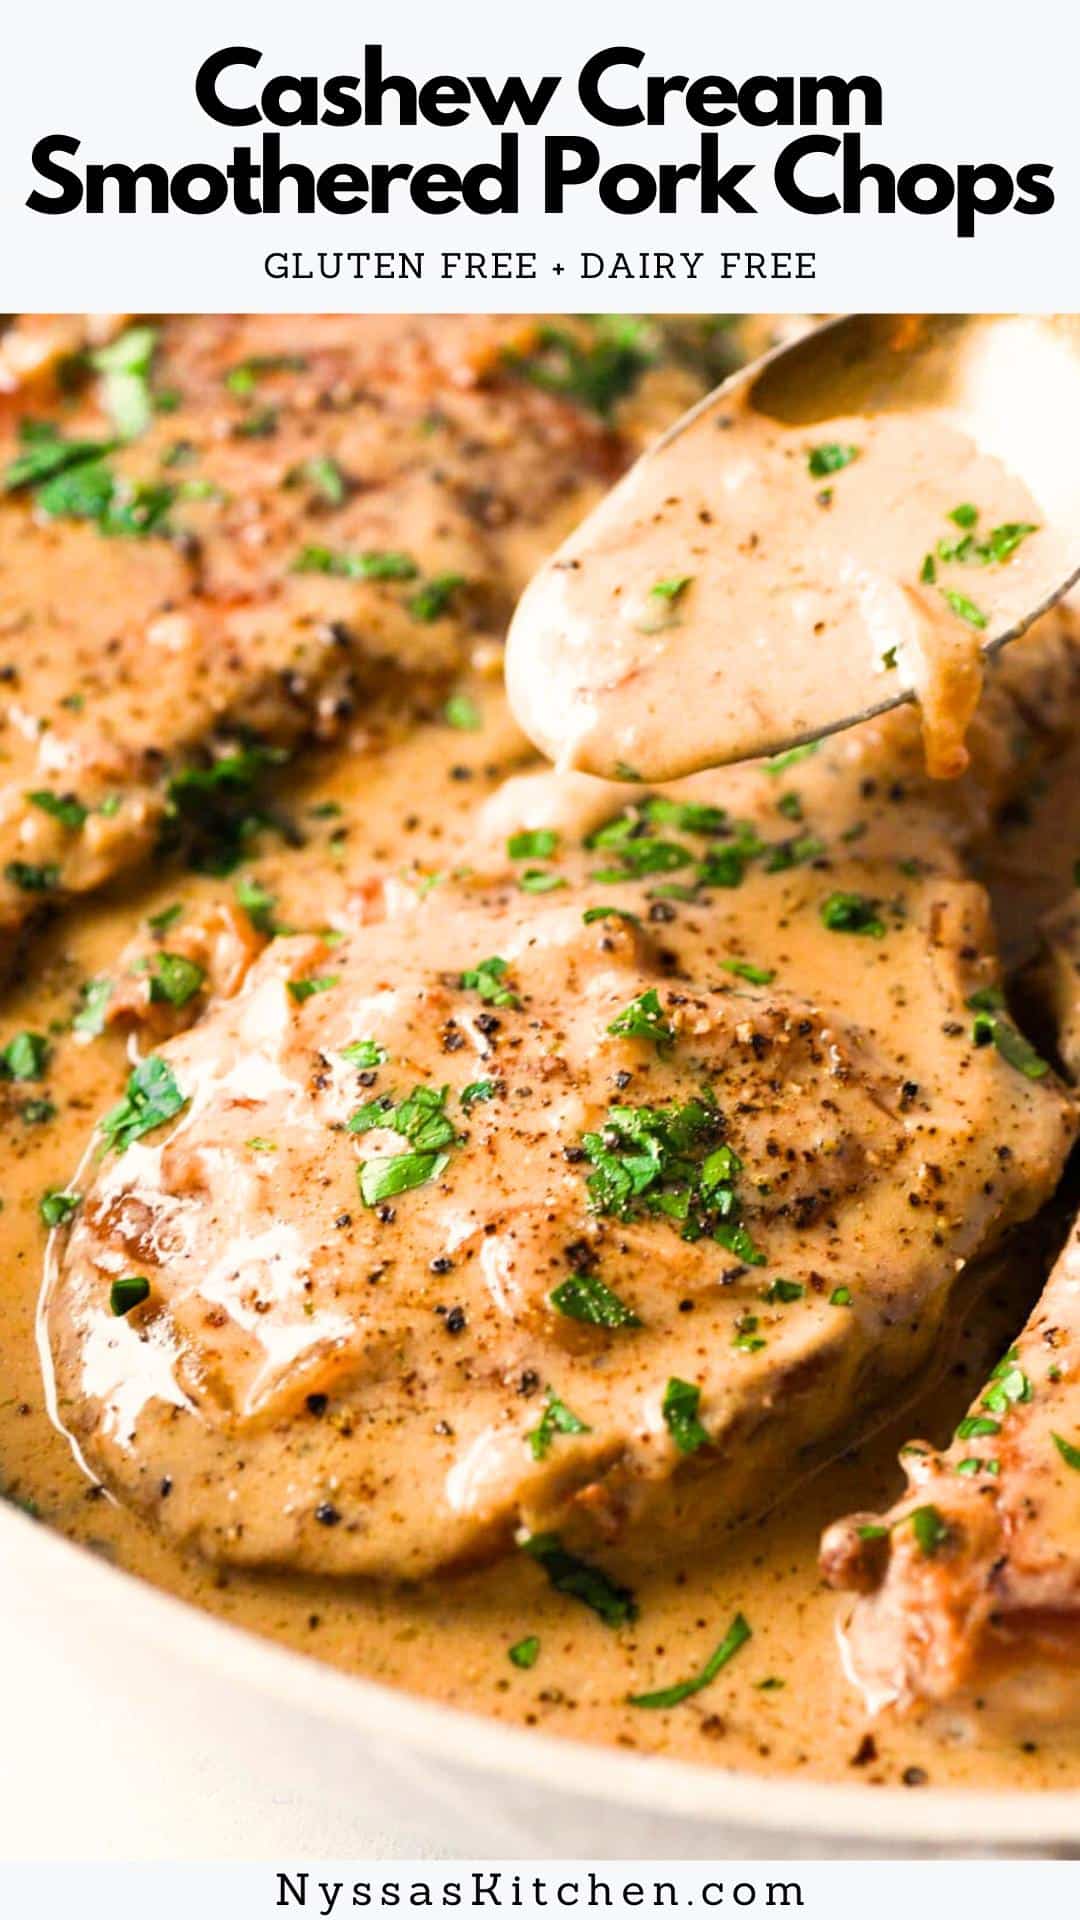 These smothered pork chops made with cashew cream instead of dairy are the perfect healthy comfort food! The sauce is made with sweet caramelized onions, flavorful herbs, and a smooth and luscious cashew cream that is 100% dairy free. An ideal cold weather dinner that will warm you up from the inside out. Recipe is gluten free, dairy free, whole30 compatible, and paleo friendly.